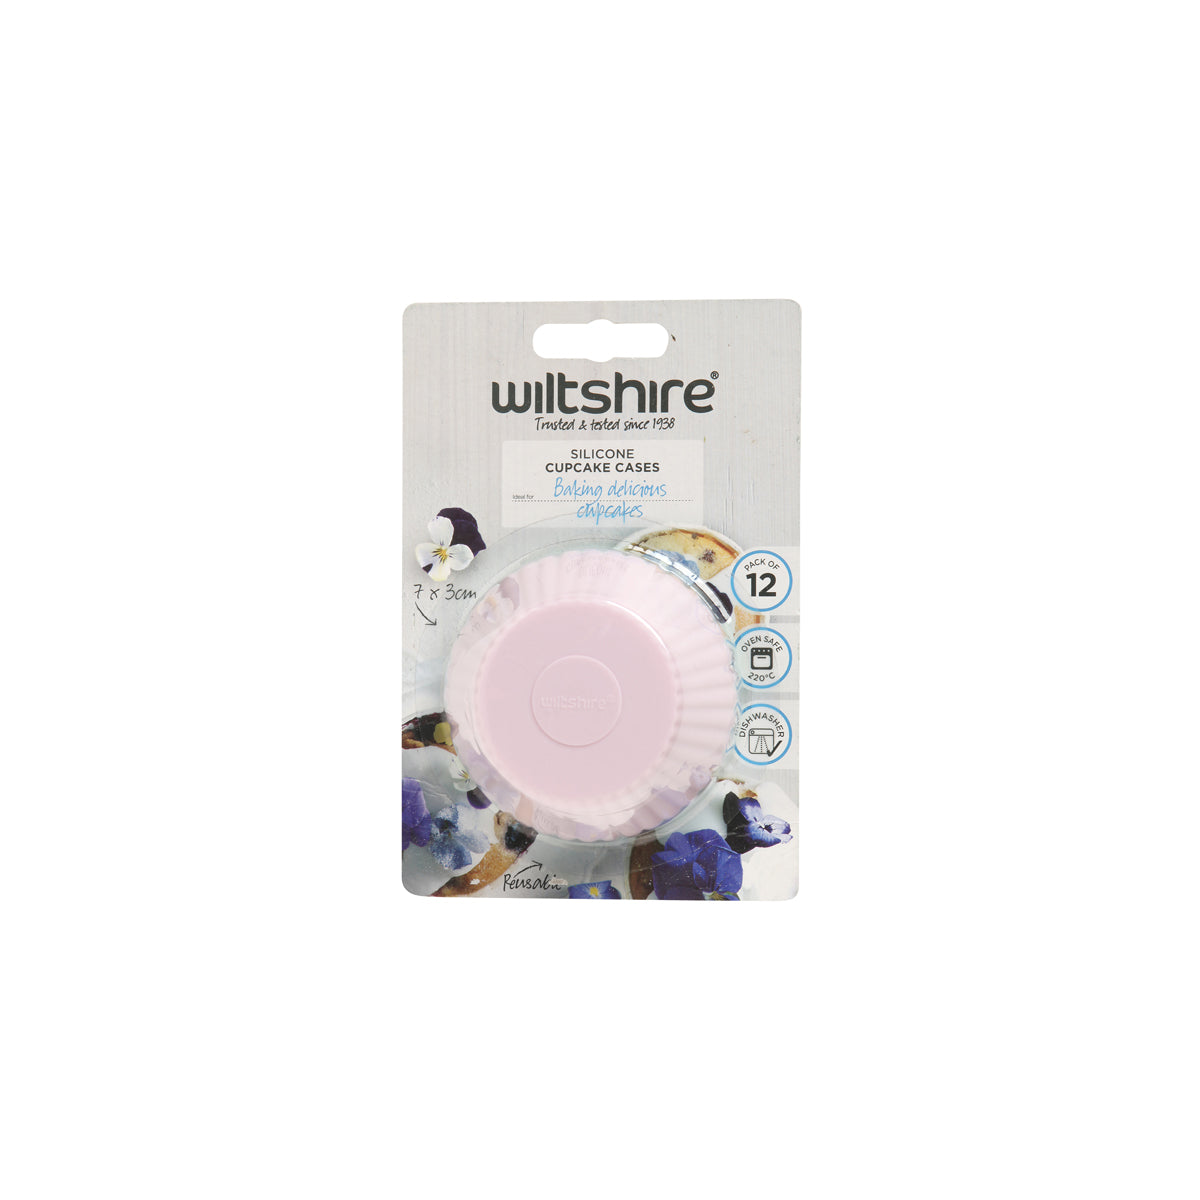 WLT40499 WILTSHIRE Cupcake Cases Silicone 12 Pack Tomkin Australia Hospitality Supplies